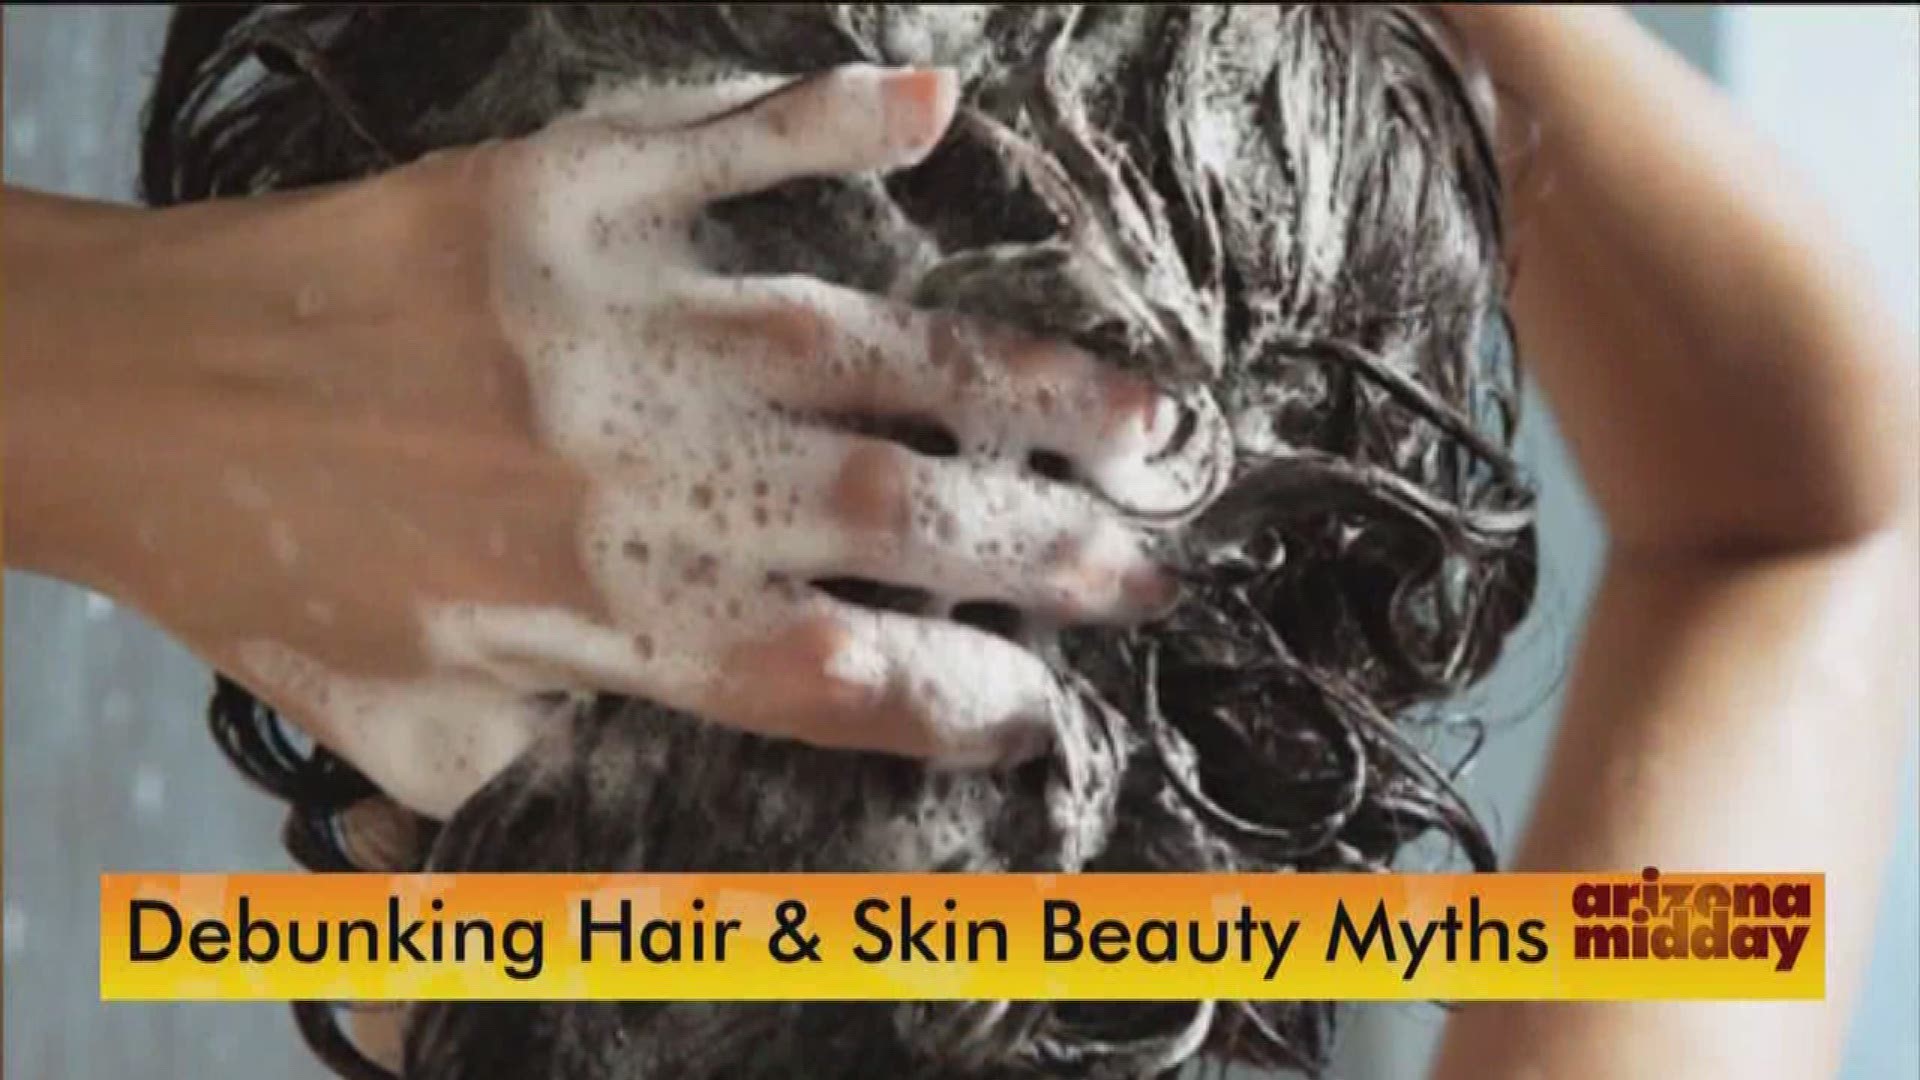 Is it okay to wash your hair everyday? We're debunking beauty myths |  